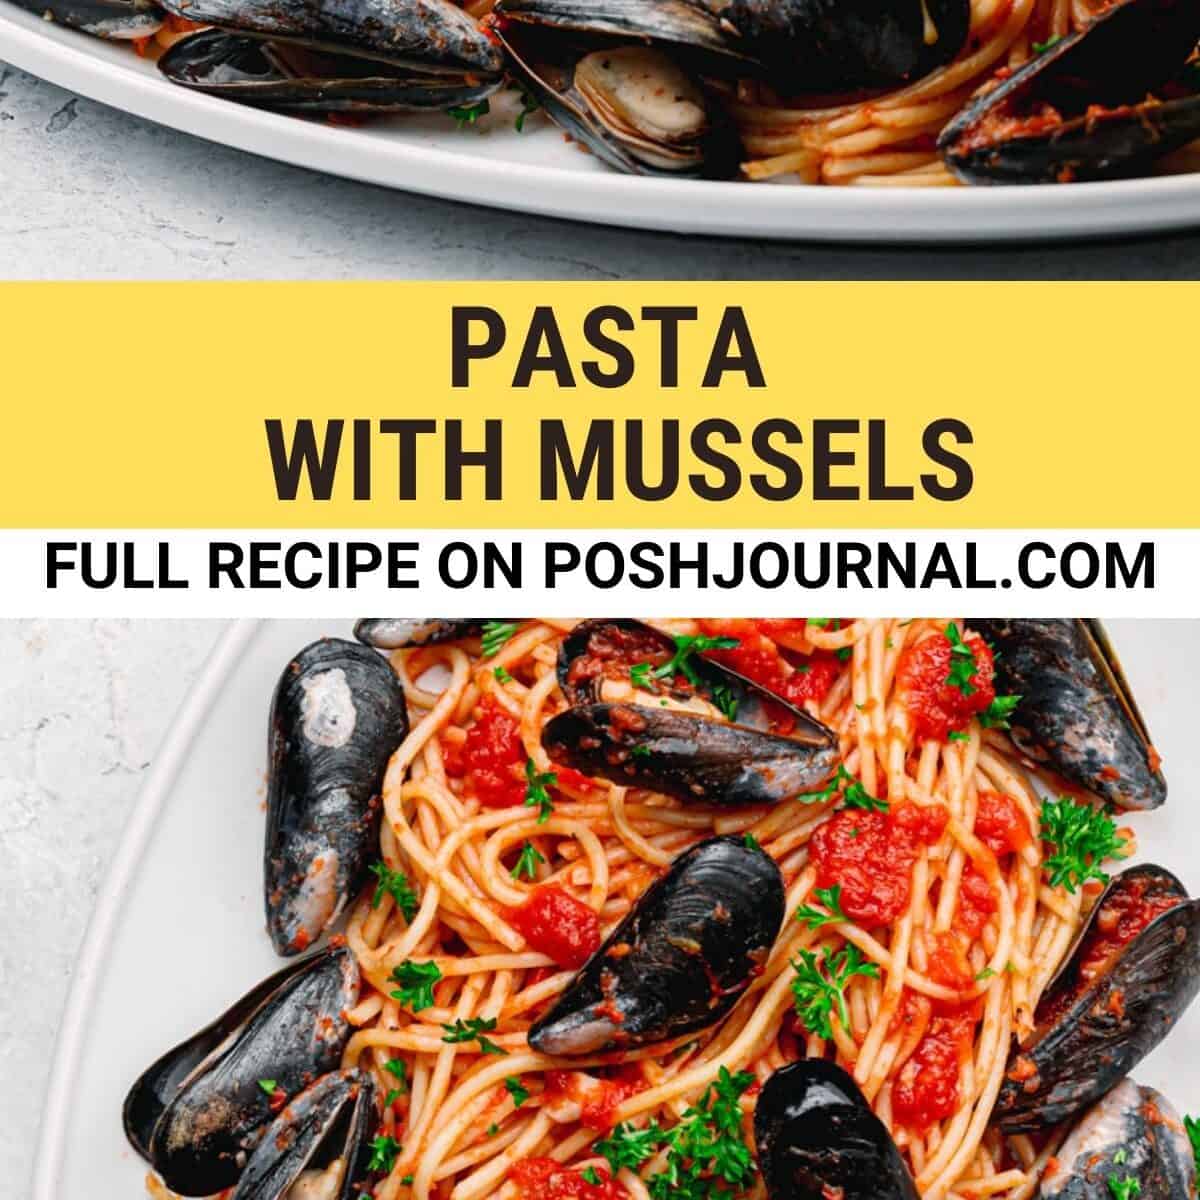 Pasta with Mussels Recipe.